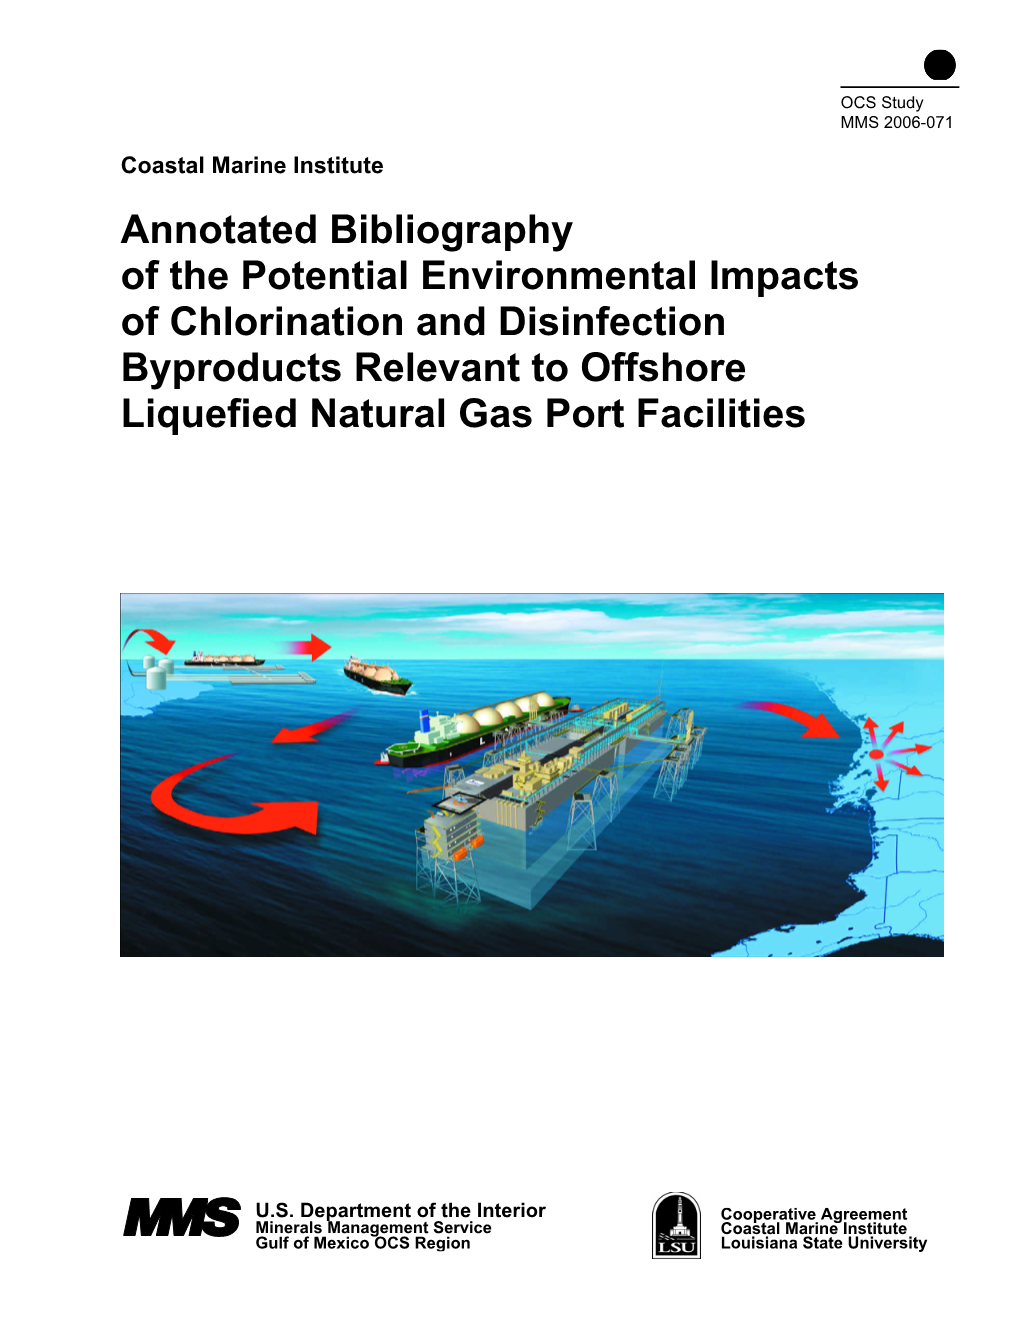 Annotated Bibliography of the Potential Environmental Impacts of Chlorination and Disinfection Byproducts Relevant to Offshore Liquefied Natural Gas Port Facilities